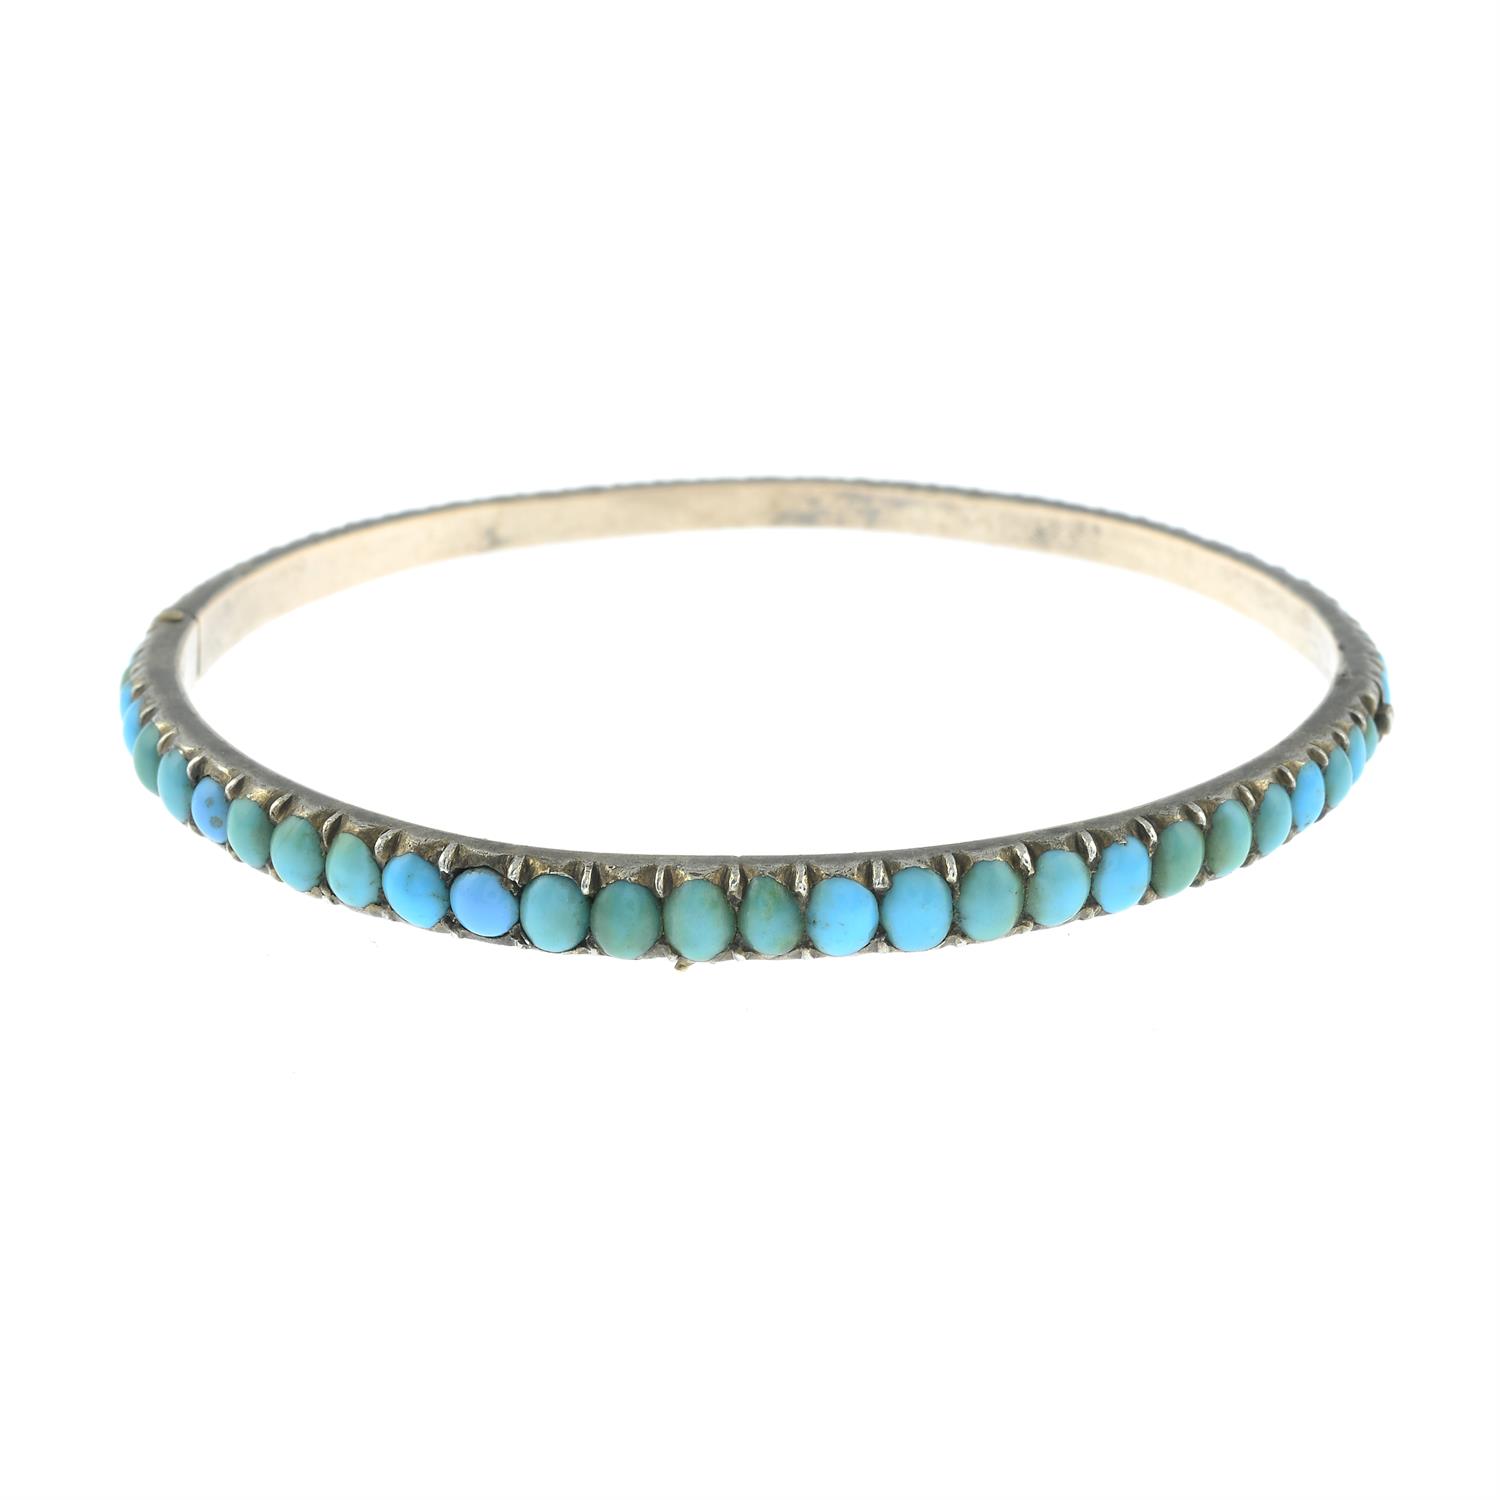 A late 19th century silver, turquoise hinged bangle.